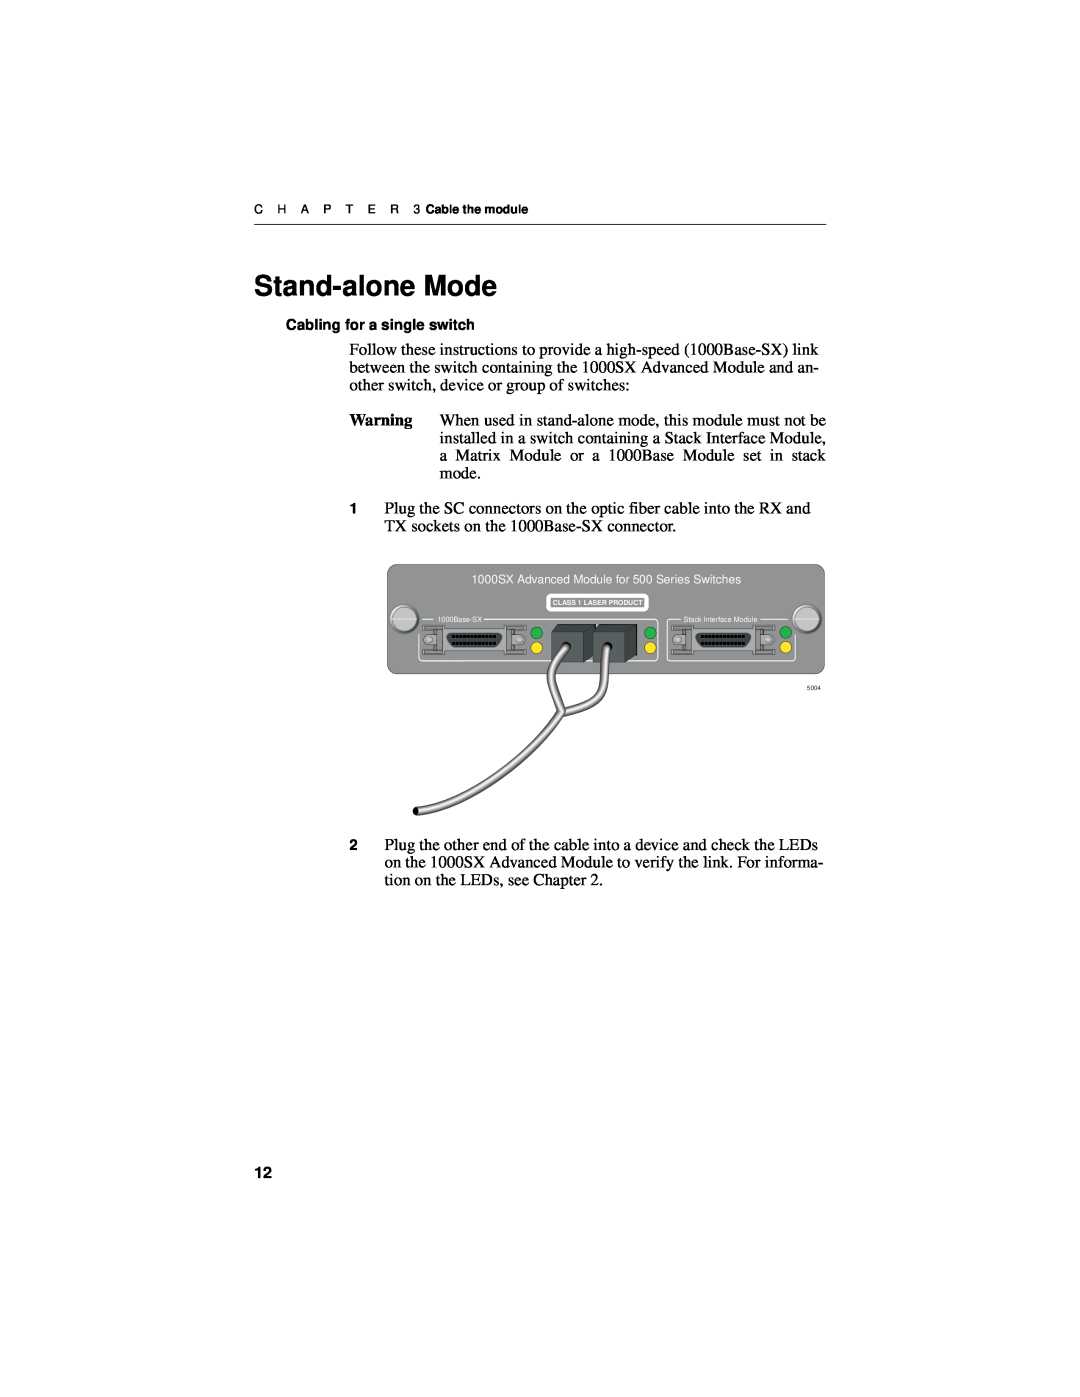 Intel 1000SX manual Stand-alone Mode, Cabling for a single switch 